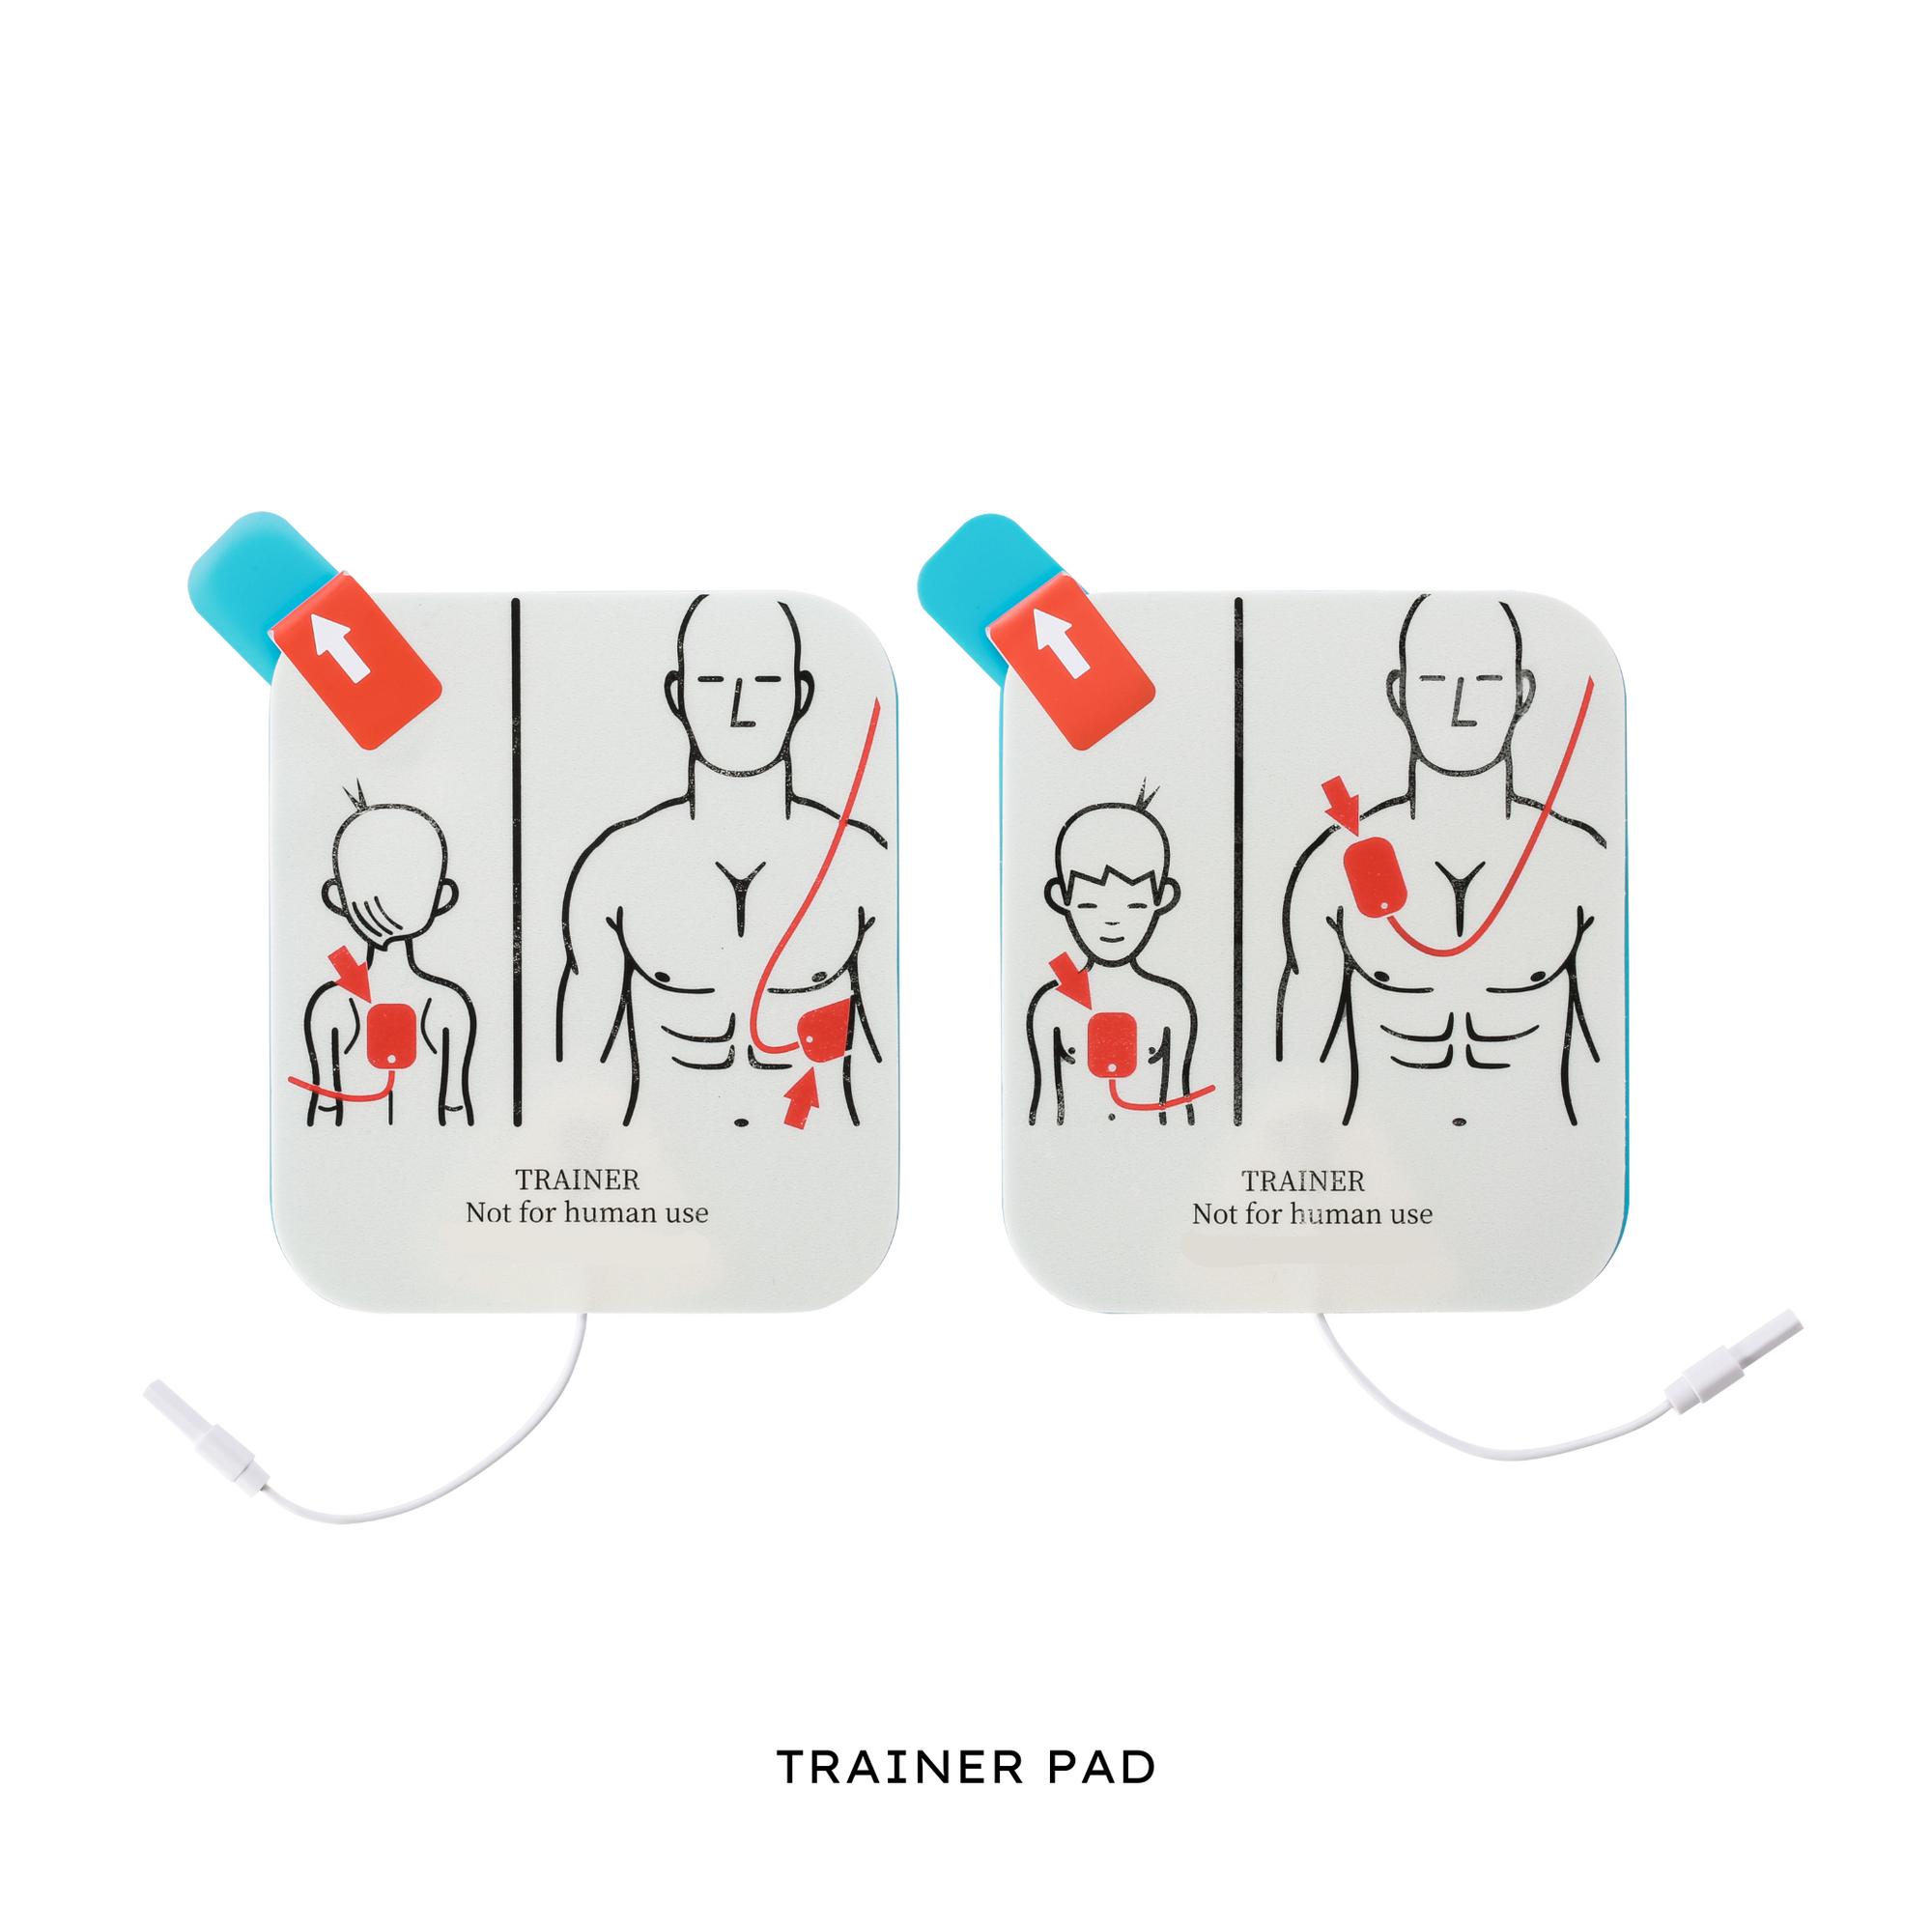 VIVEST Trainer Automated External Defibrillator (AED) Powerbeat X3